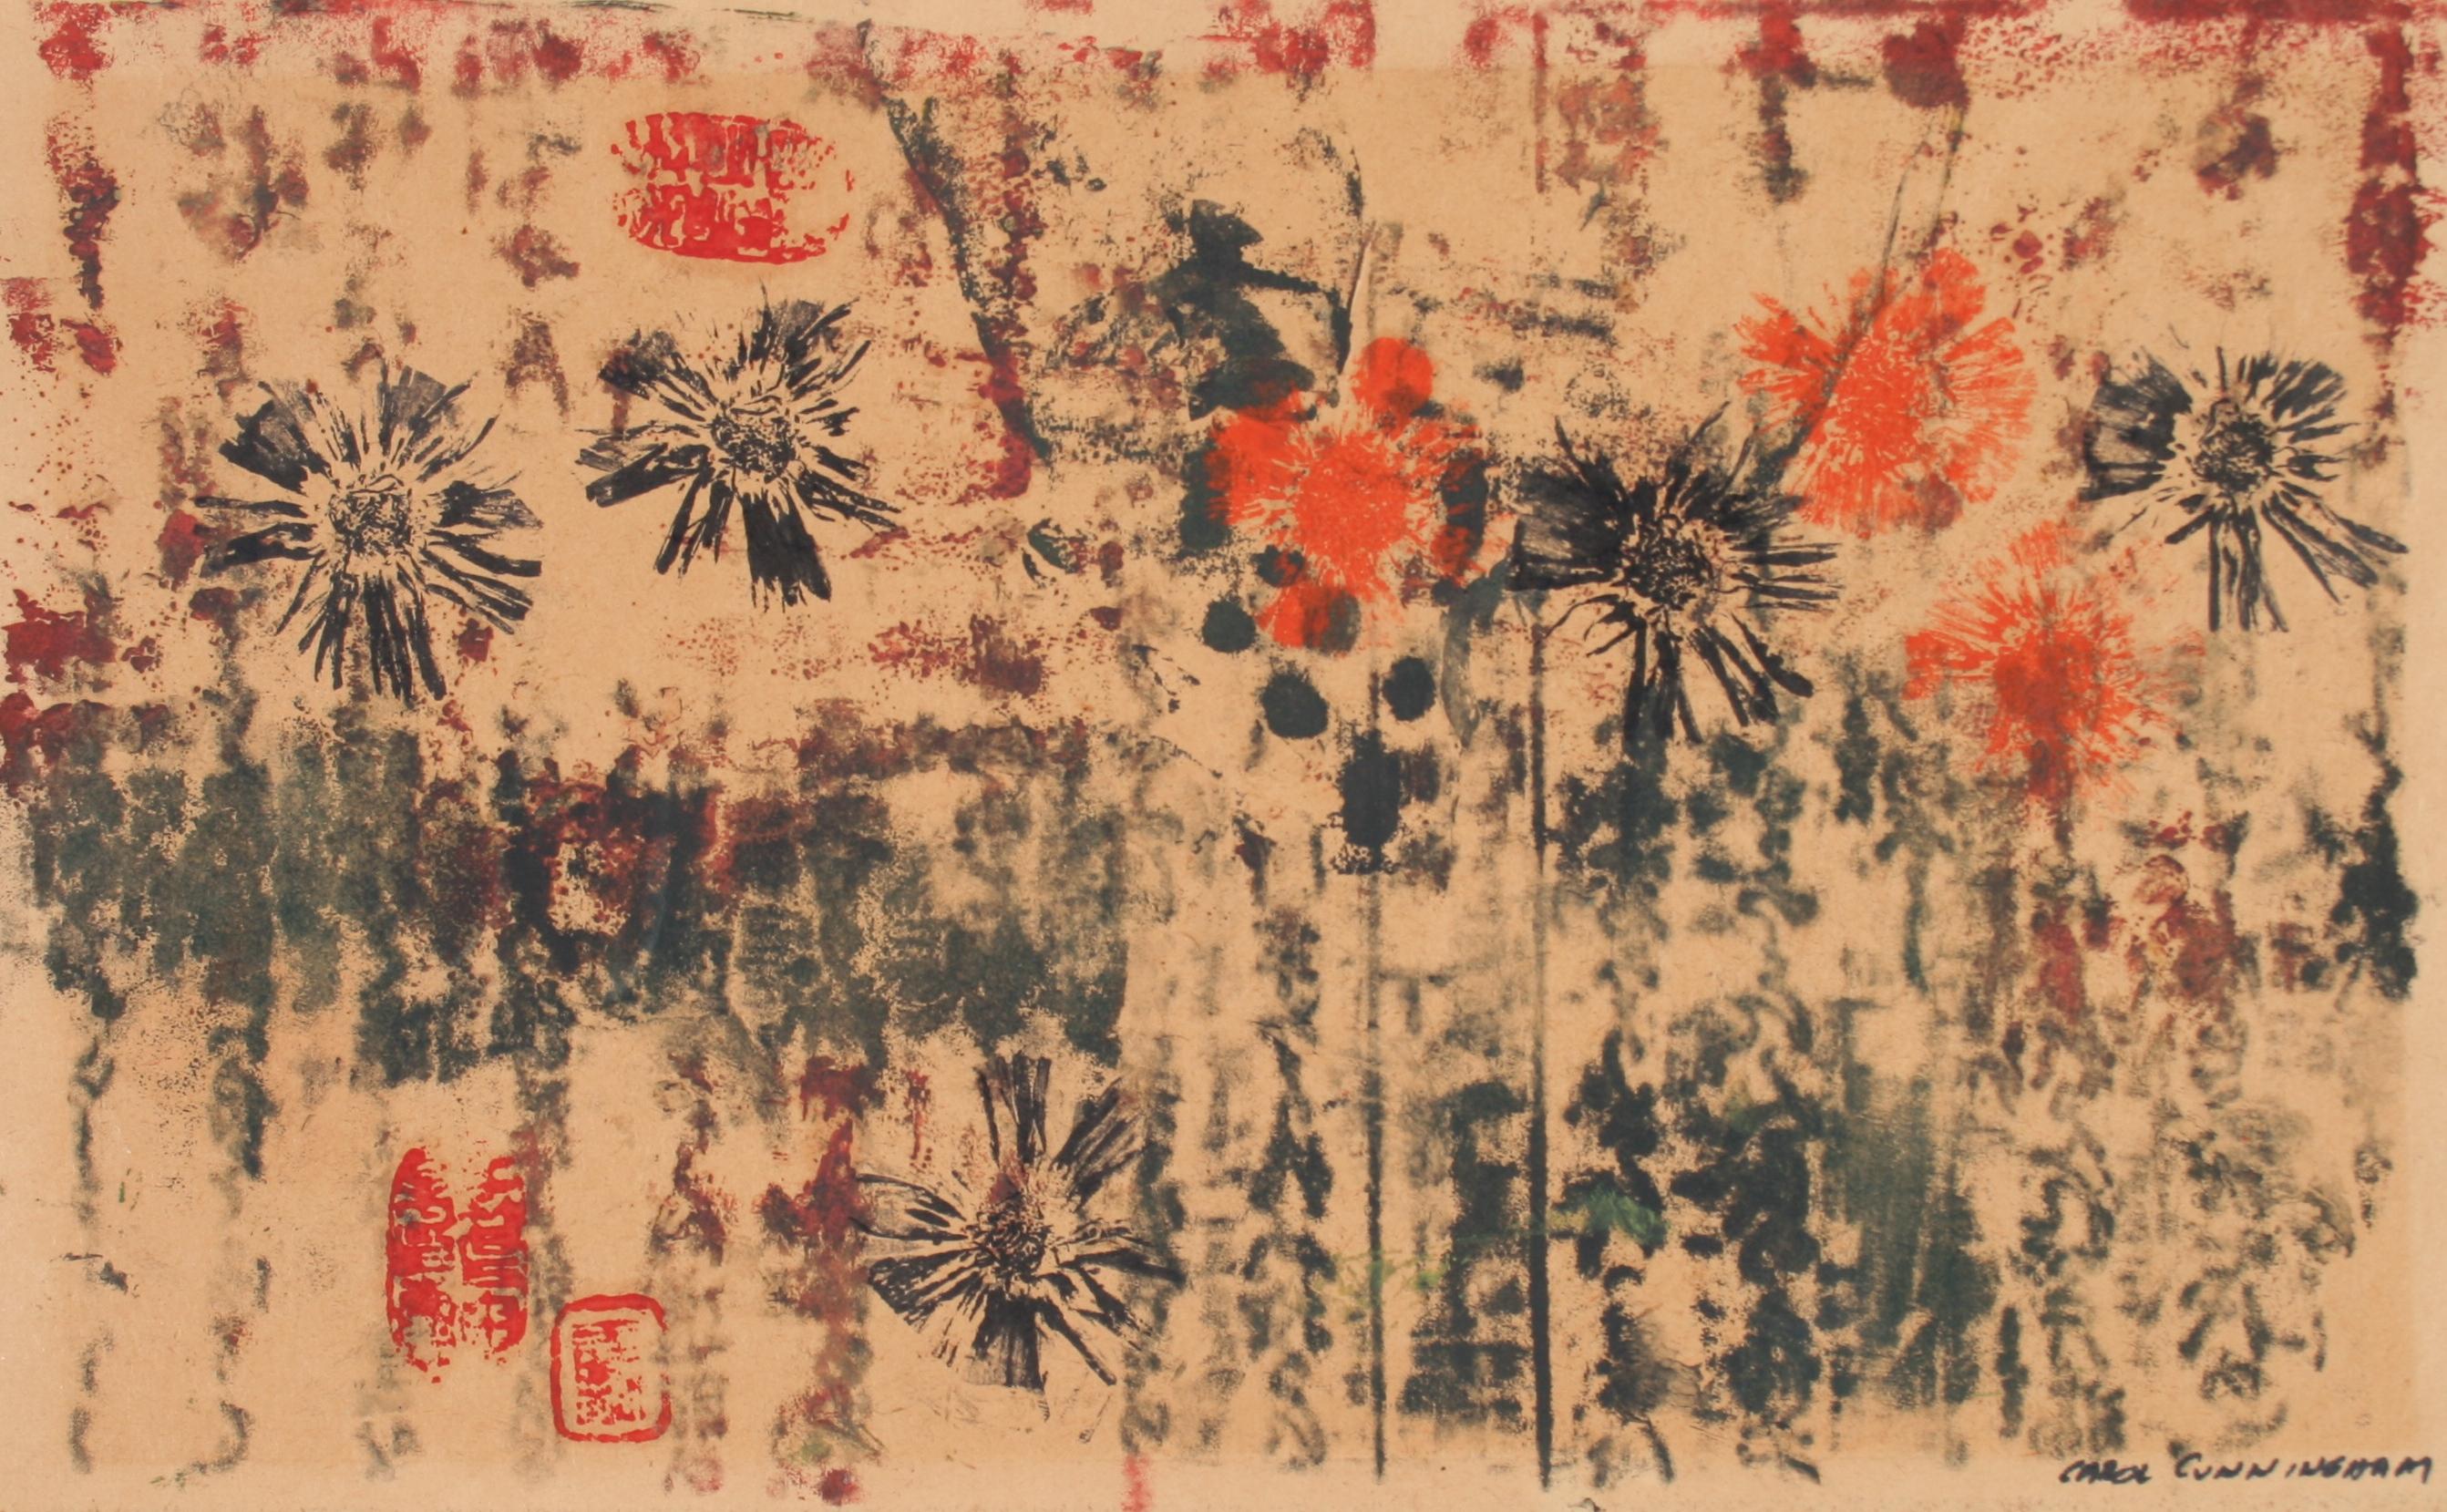 Abstracted Floral Print 1963 Monotype